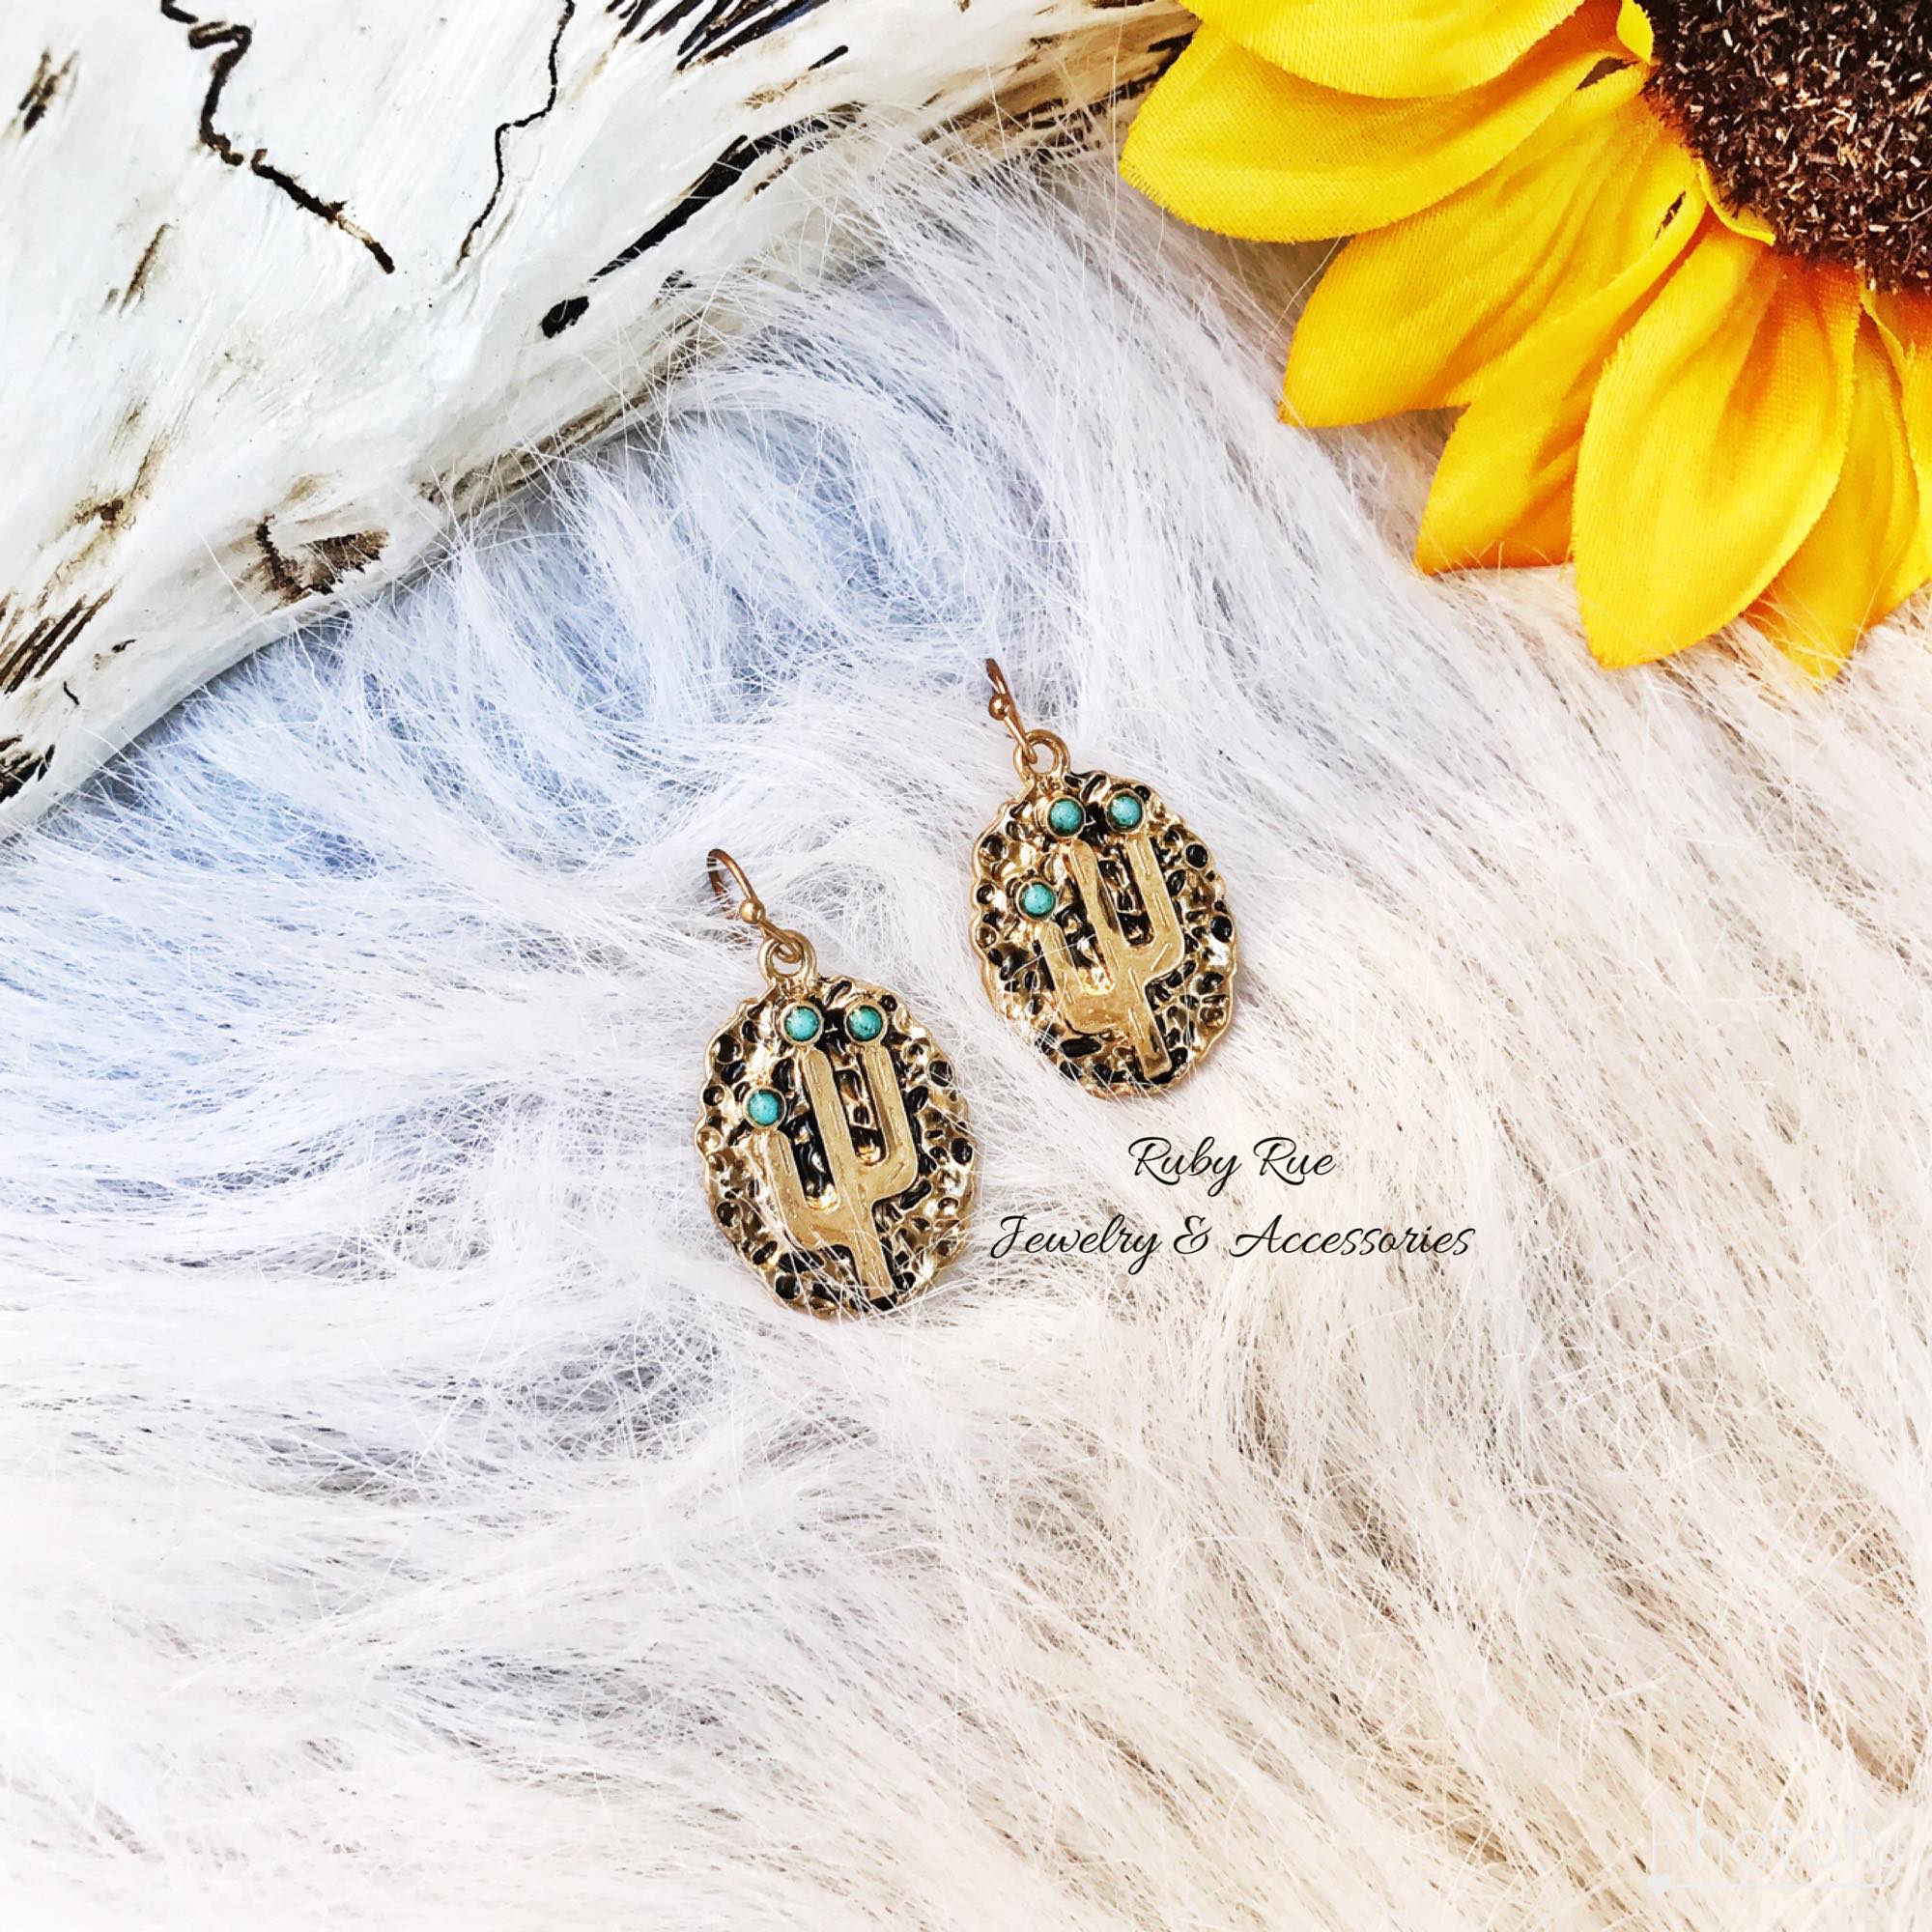 Golden Cactus Earrings - Ruby Rue Jewelry & Accessories